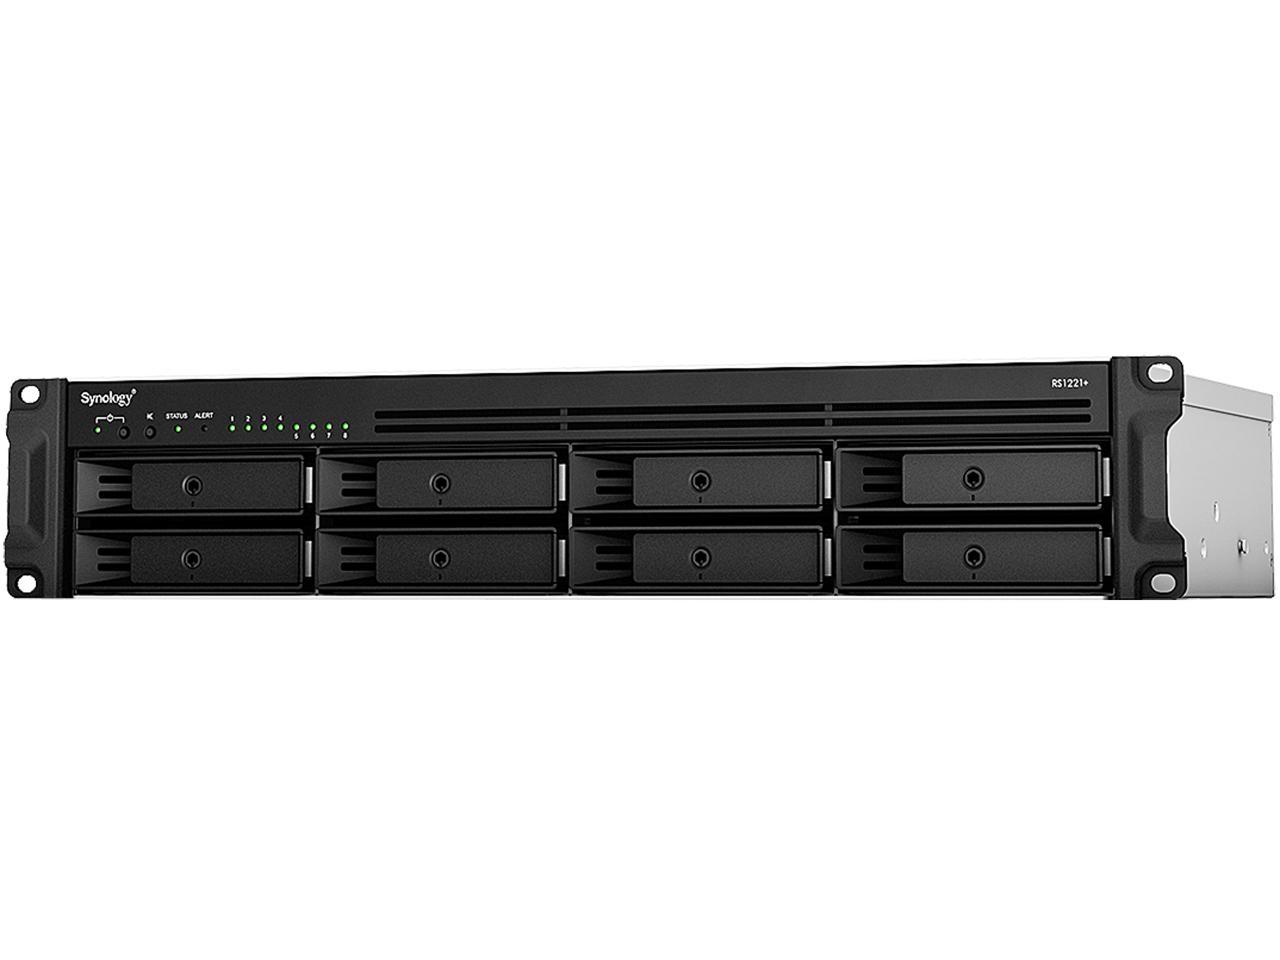 Synology RS1221+ RackStation with 4GB RAM 800GB (2x400GB) Cache, 1-Port 10GbE Adapter and 64TB (8 x 8TB) of Synology Plus NAS Drives Fully Assembled and Tested